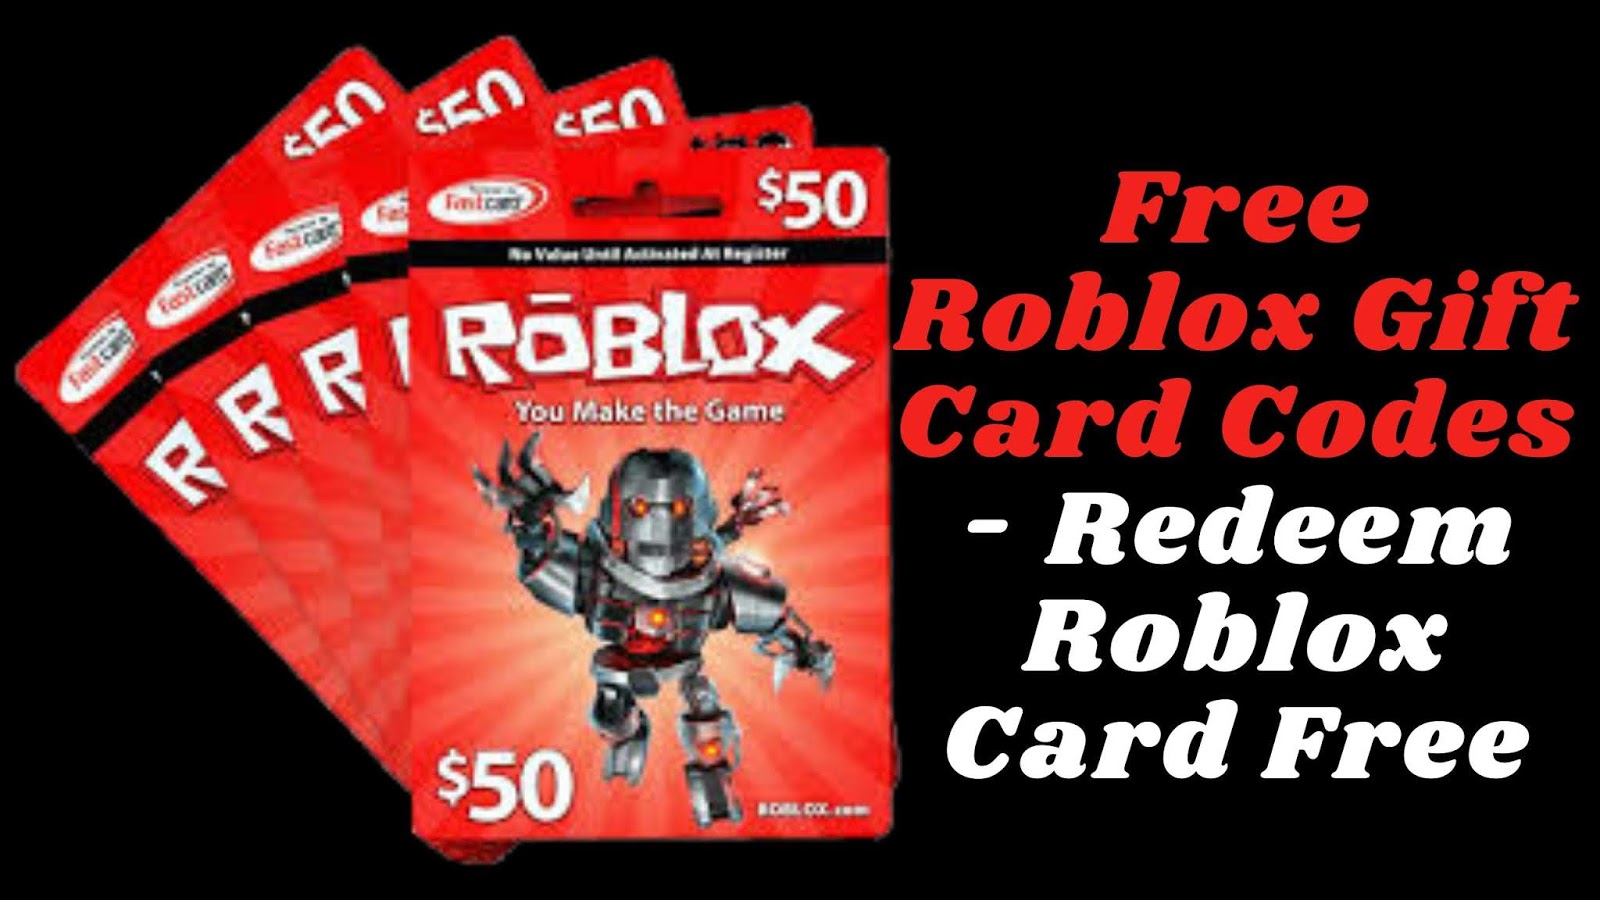 Free Gift Cards Free Roblox Gift Card Codes Redeem Roblox Card Free - get a roblox gift card code